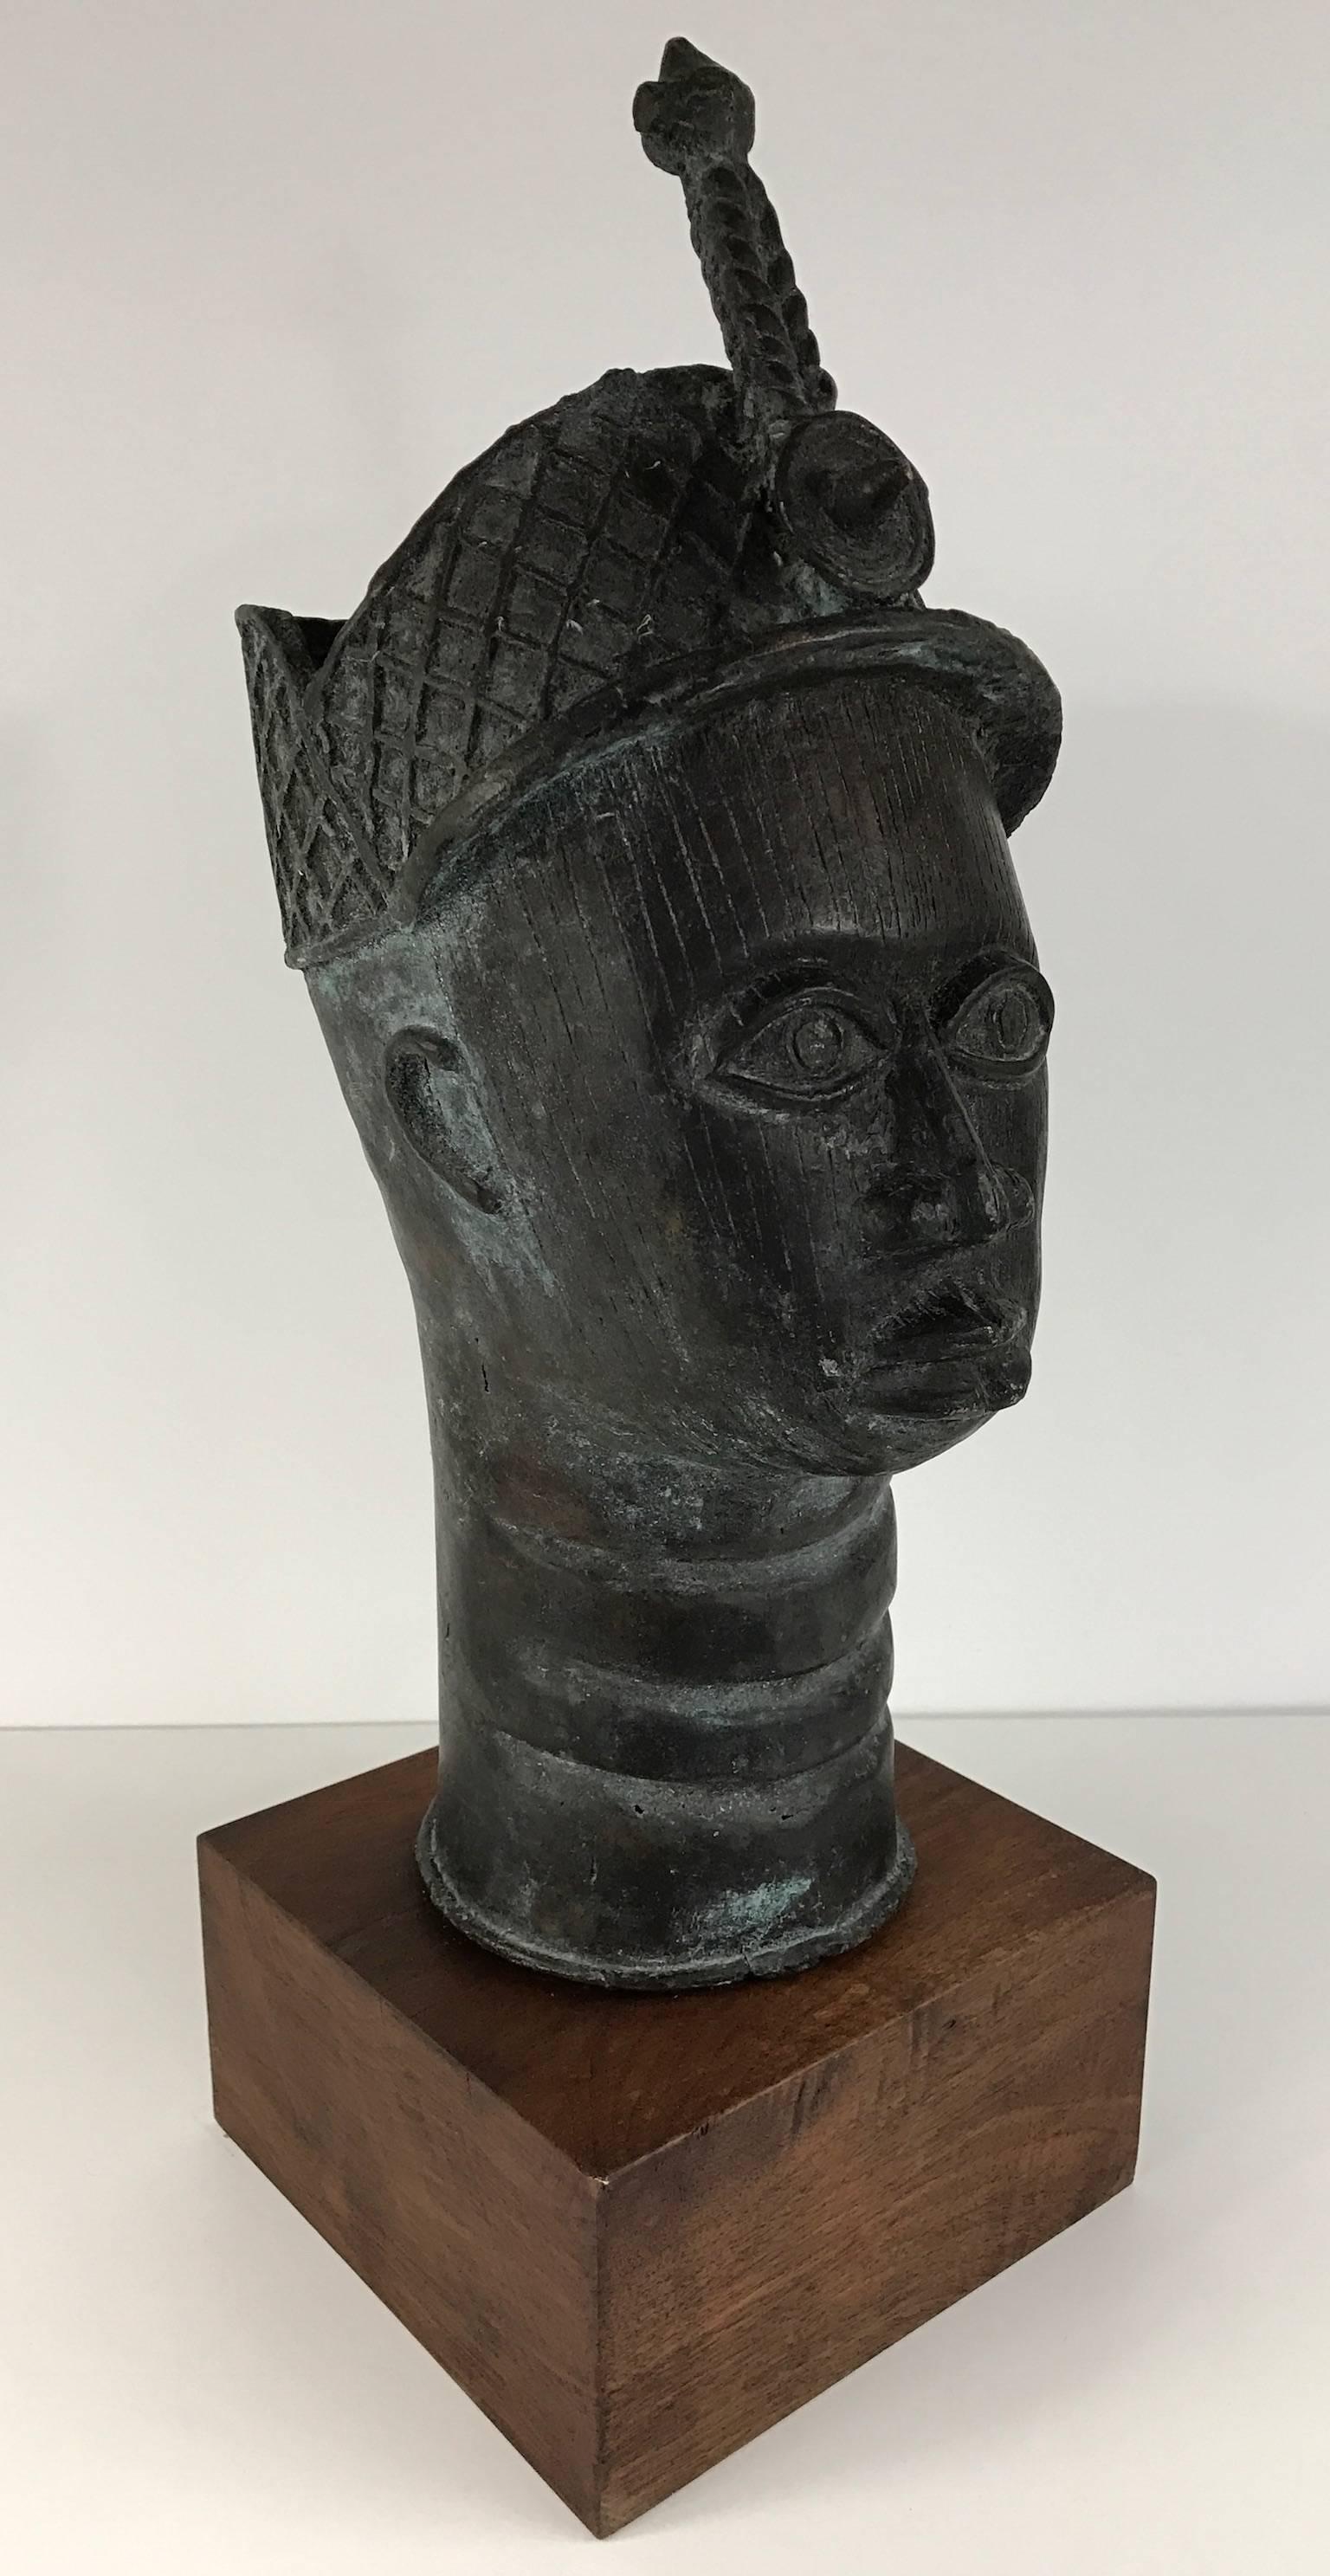 African bronze head of King Oba, ruler of Benin Kingdom. Wonderful etched lines and detailed crown. Mounted on wood base.